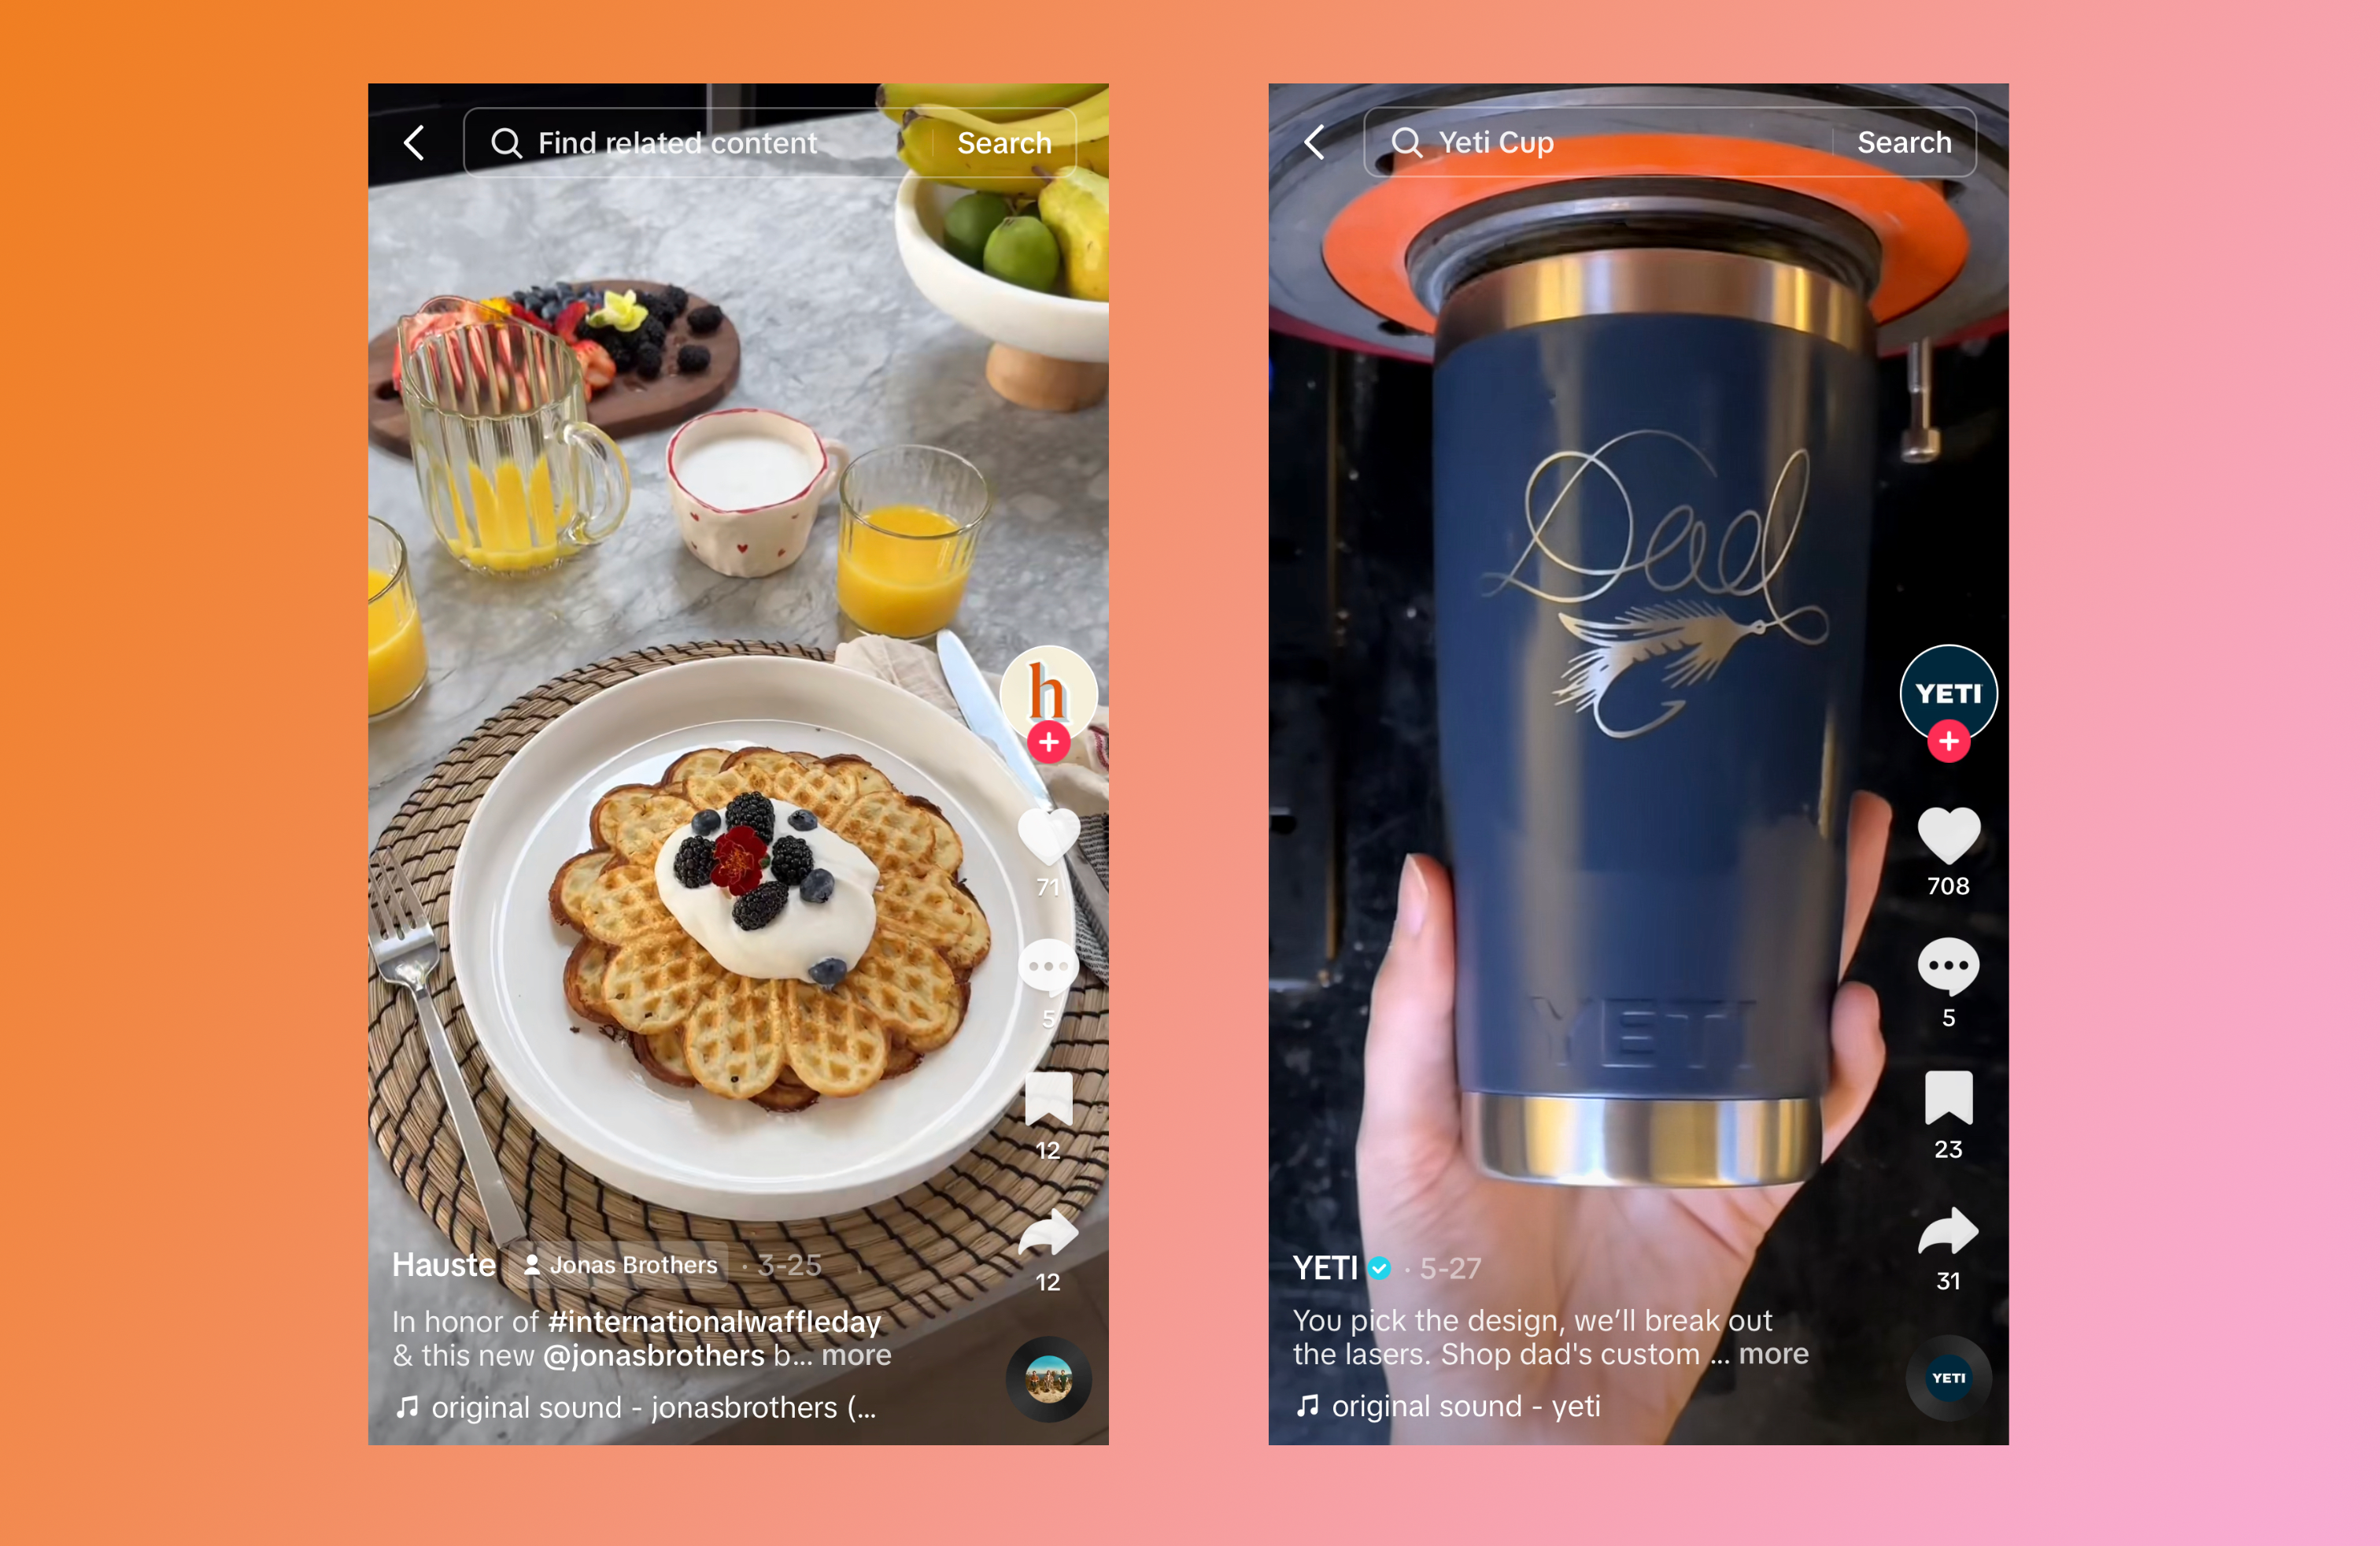 Two side by side panels show examples of timely brand videos on TikTok